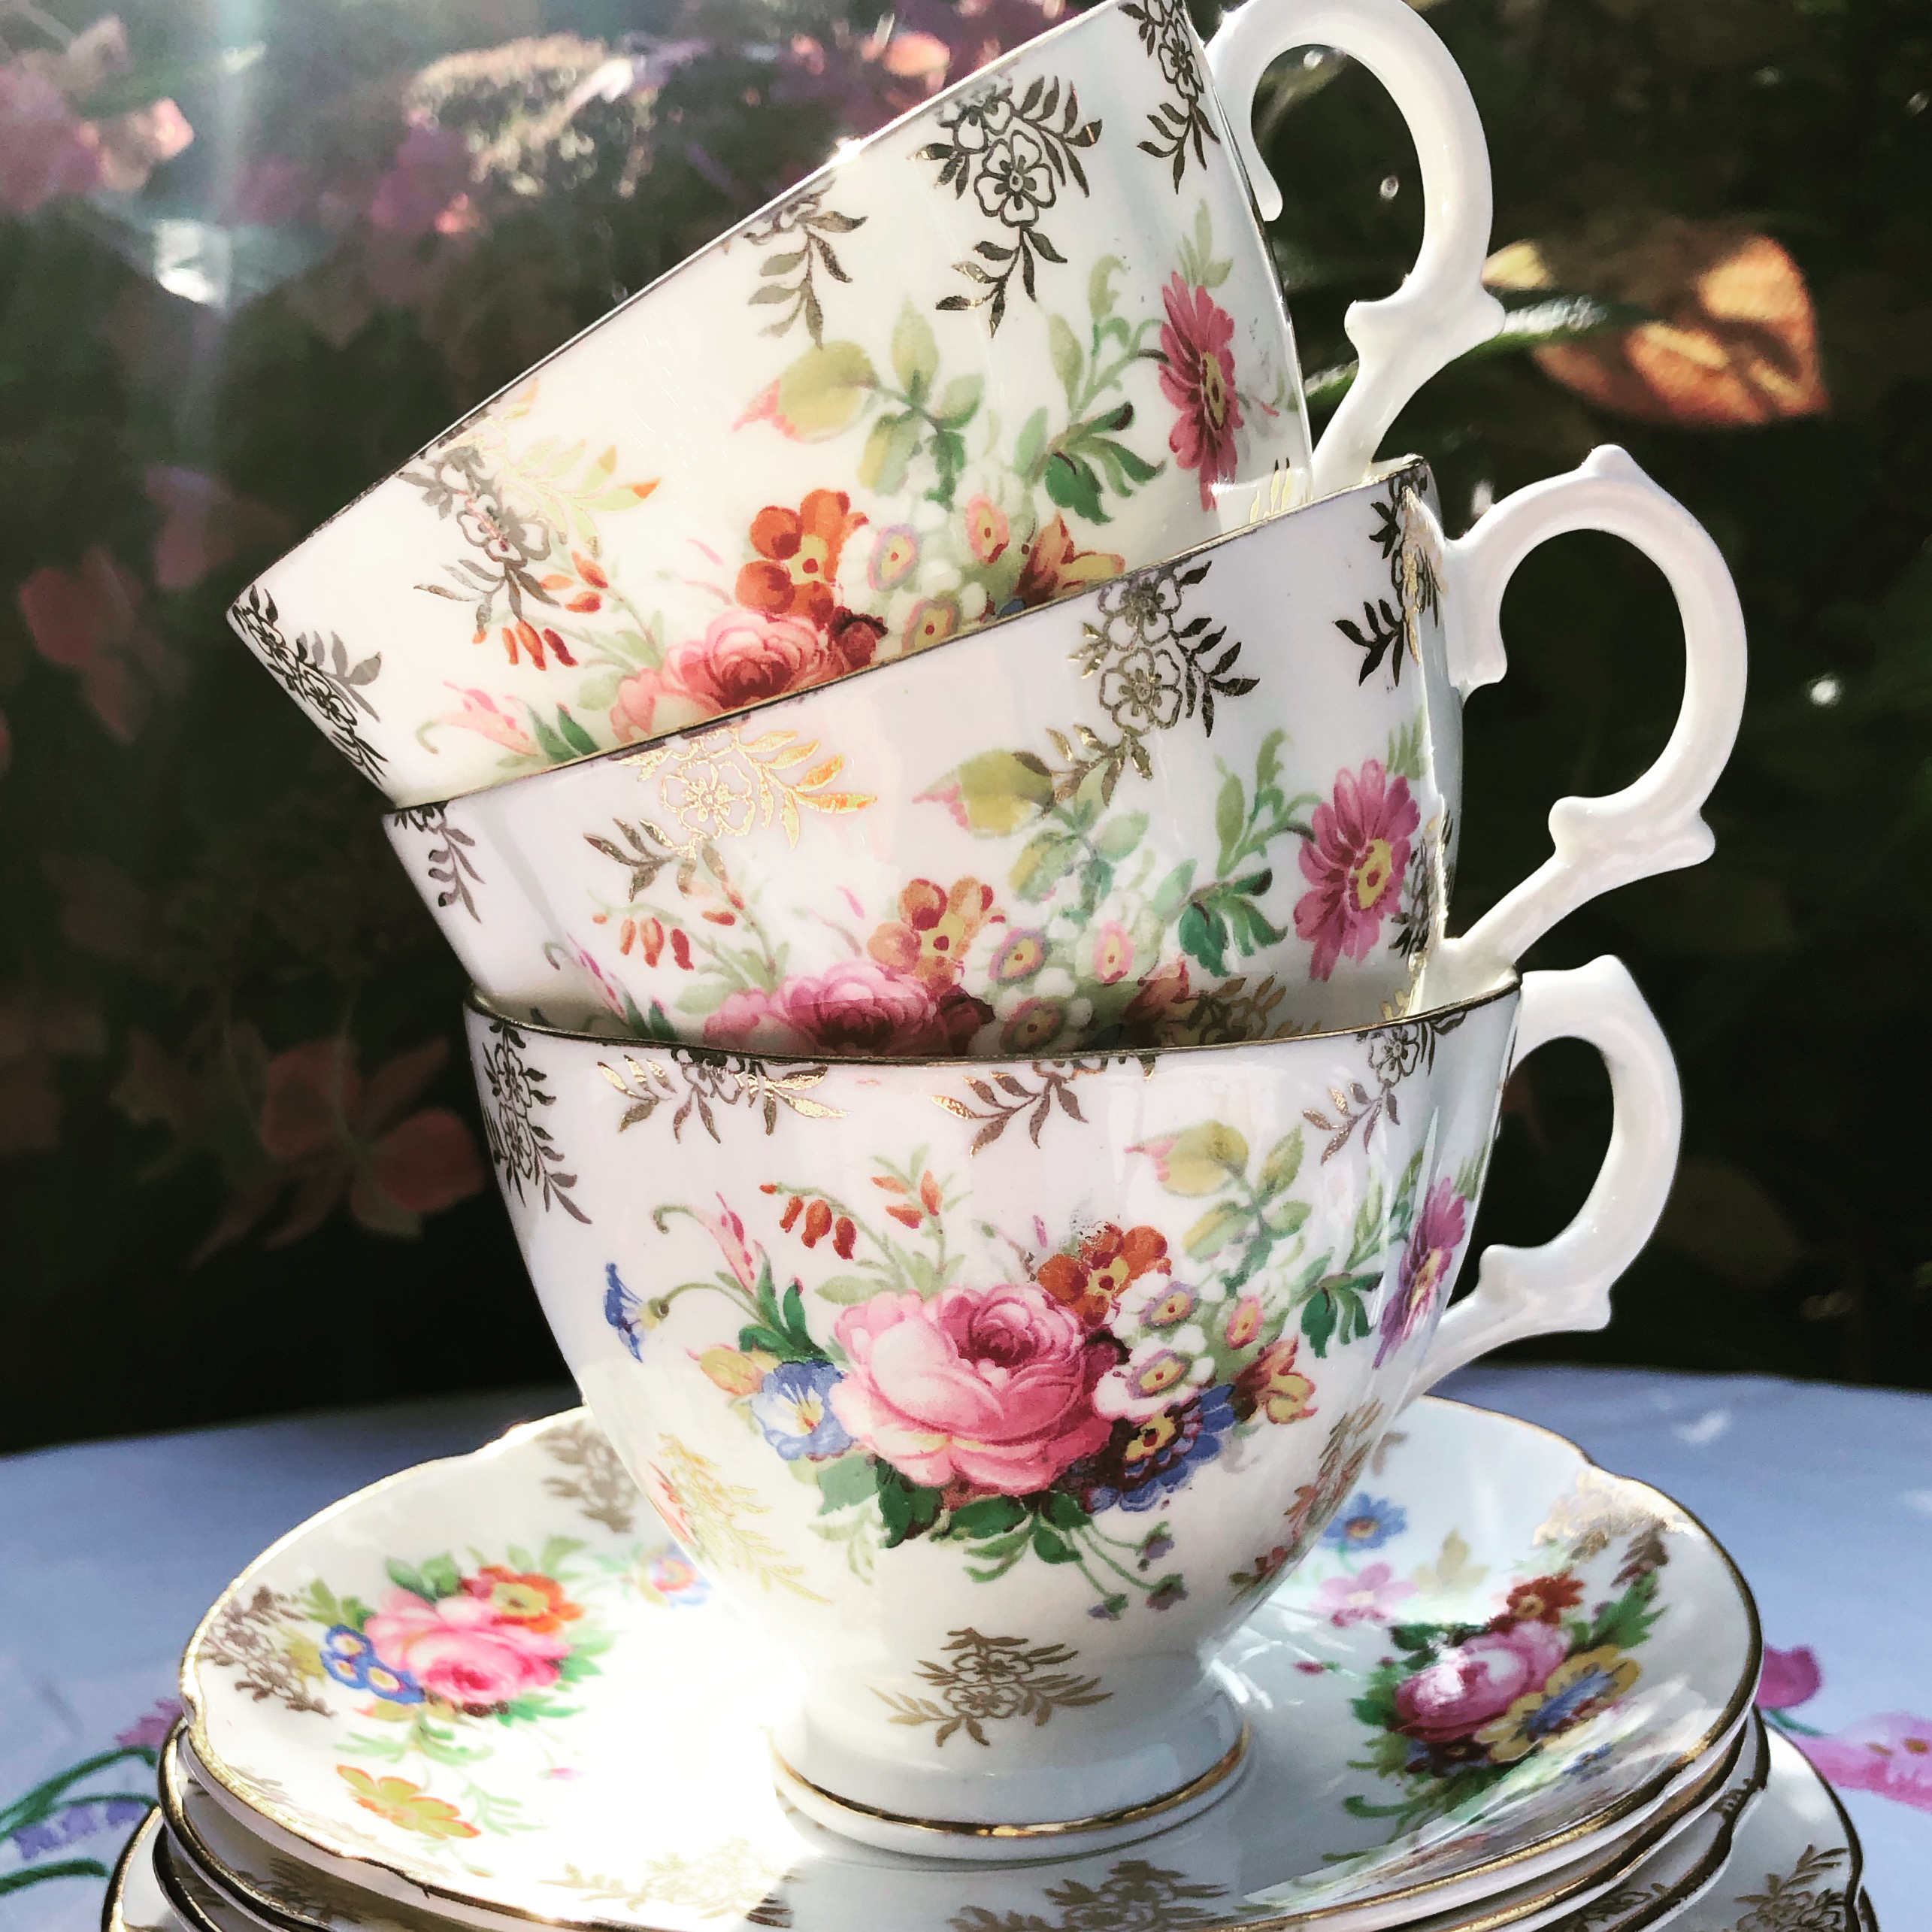 Vintage China Hire - Brentwood Essex